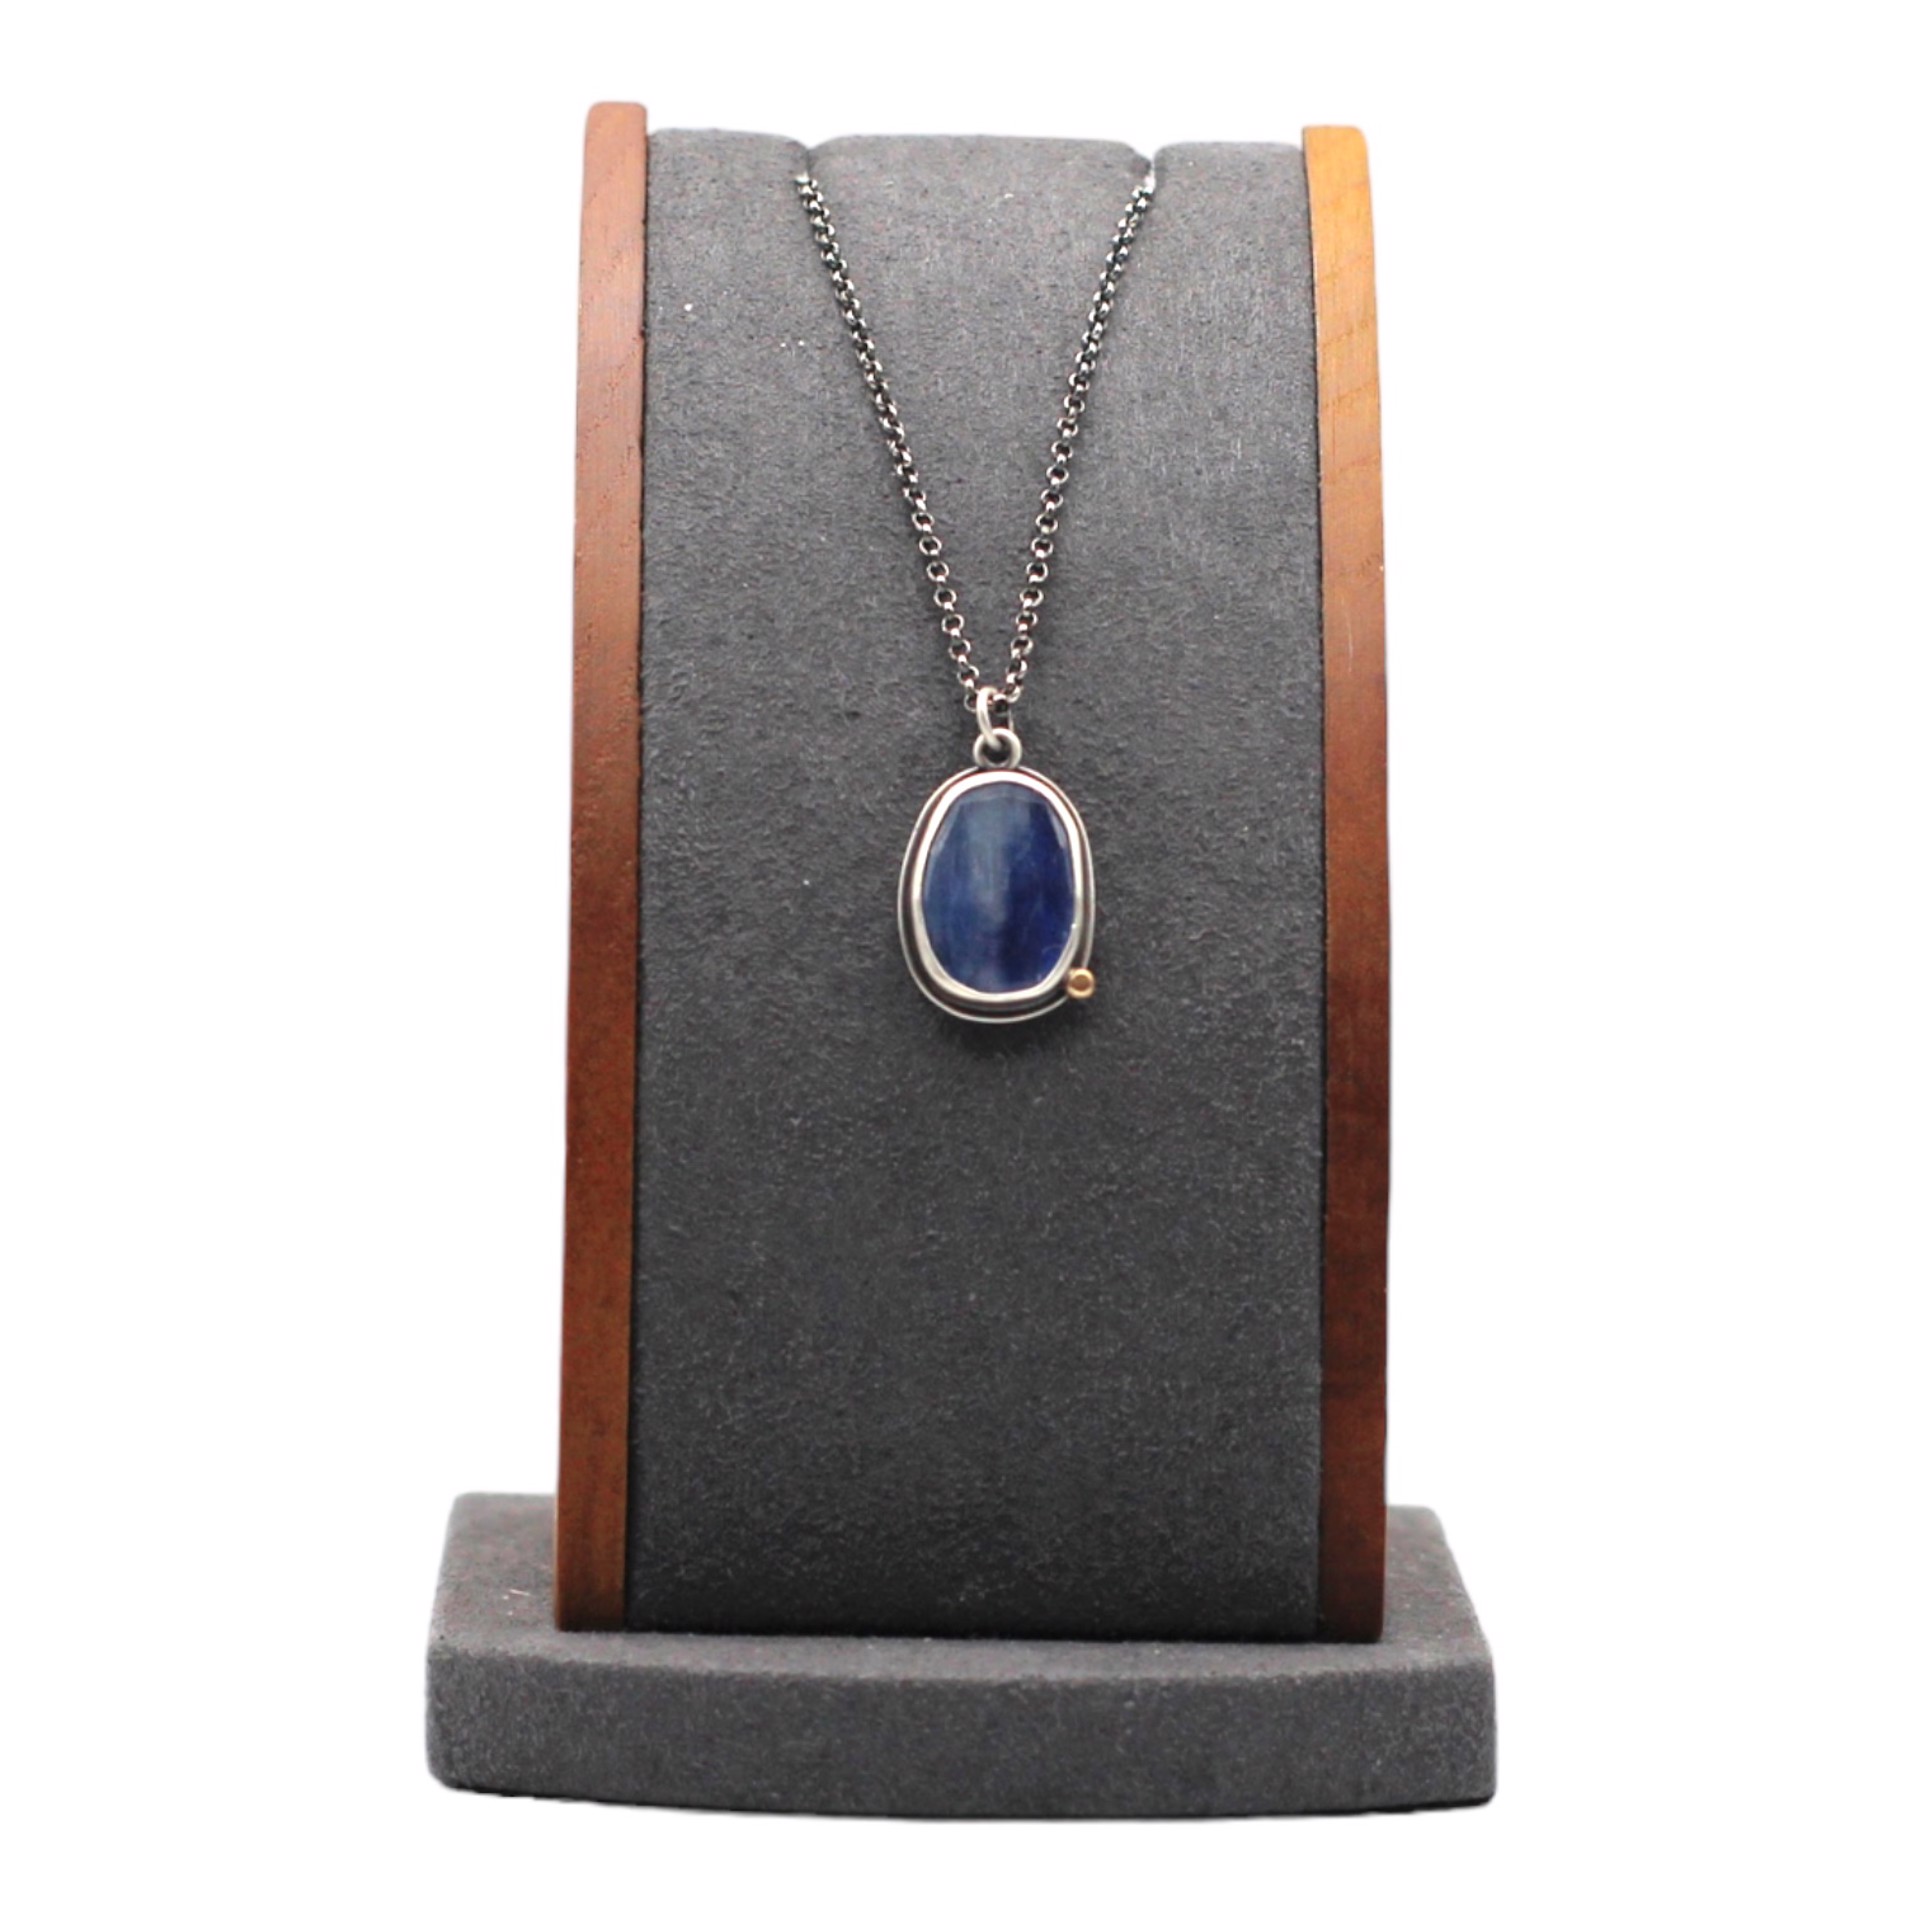 Blue Kyanite with 14k Gold Pebble Necklace  - 17"chain by Kim Knuth